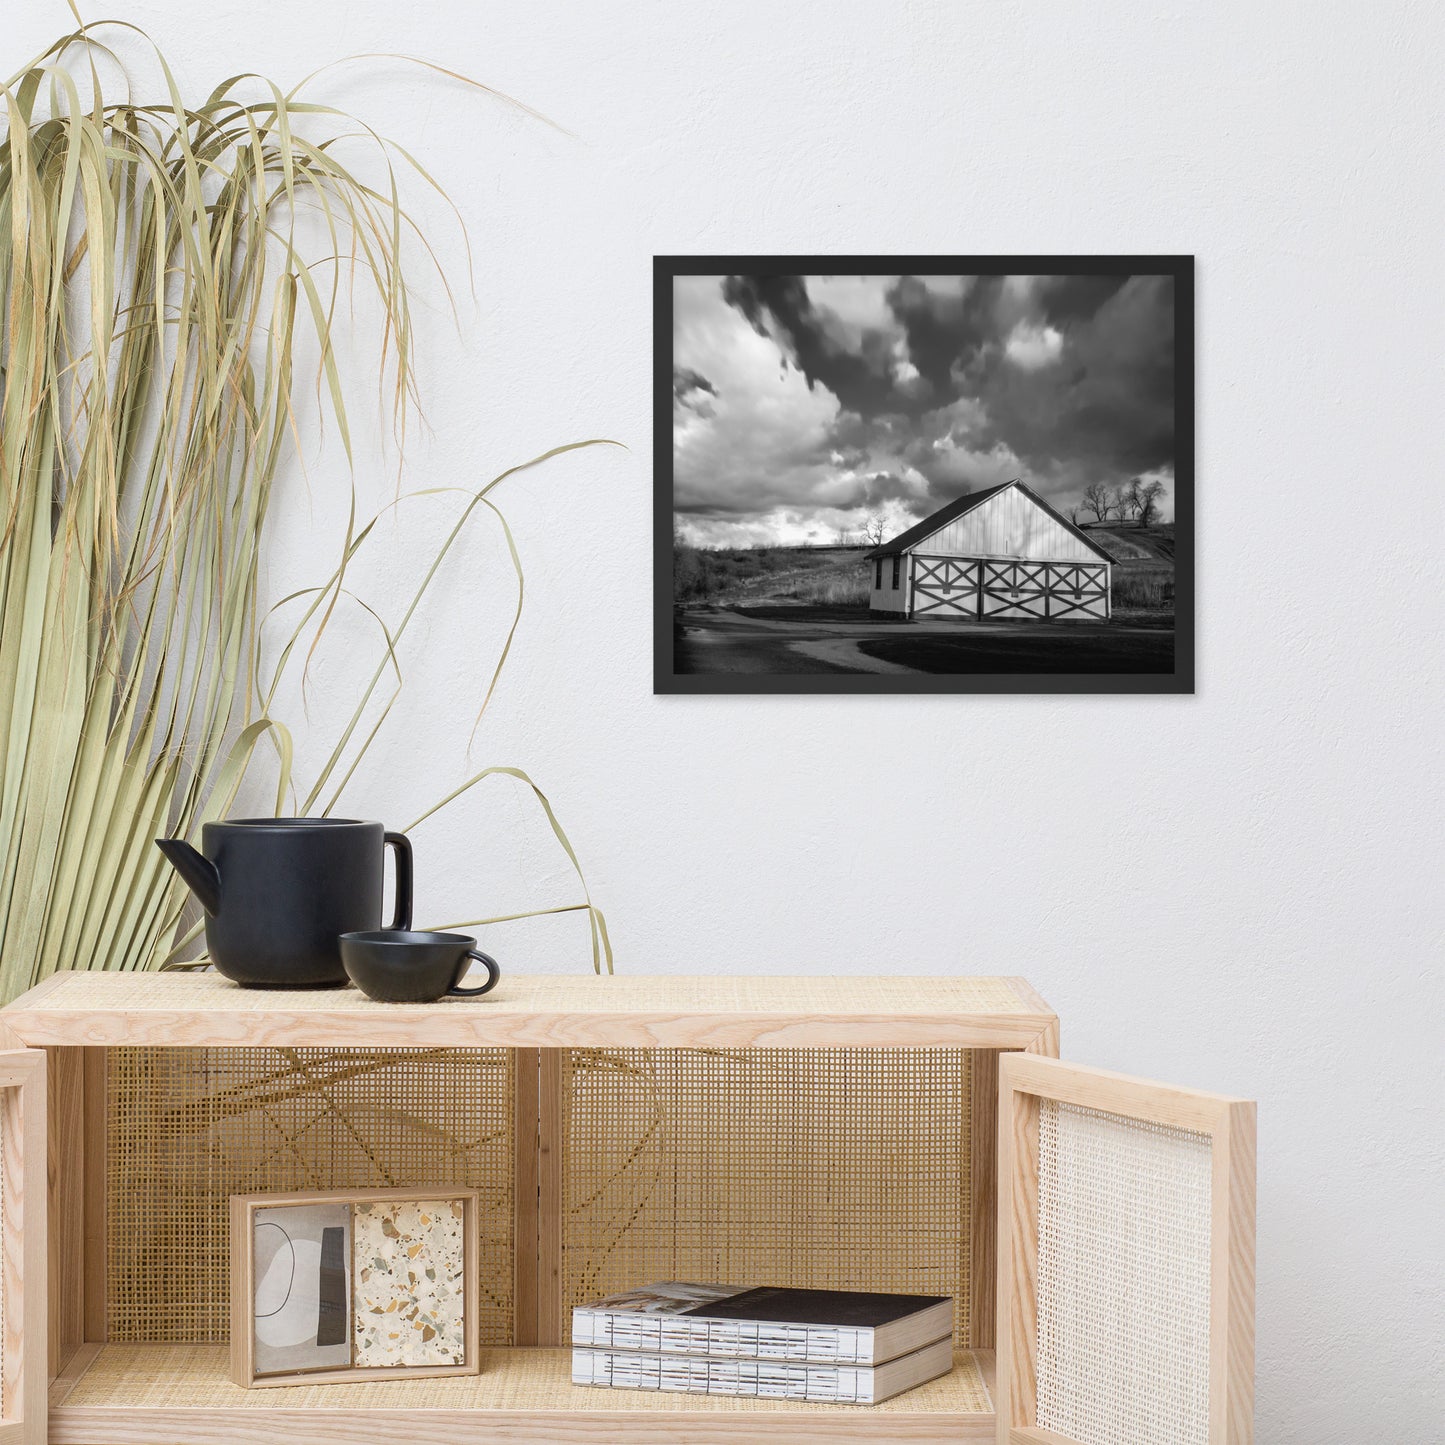 Guest Bedroom Artwork: Aging Barn in the Morning Sun in Black and White - Rural / Country Style Landscape / Nature Photograph  Framed Wall Art Print - Wall Decor - Artwork